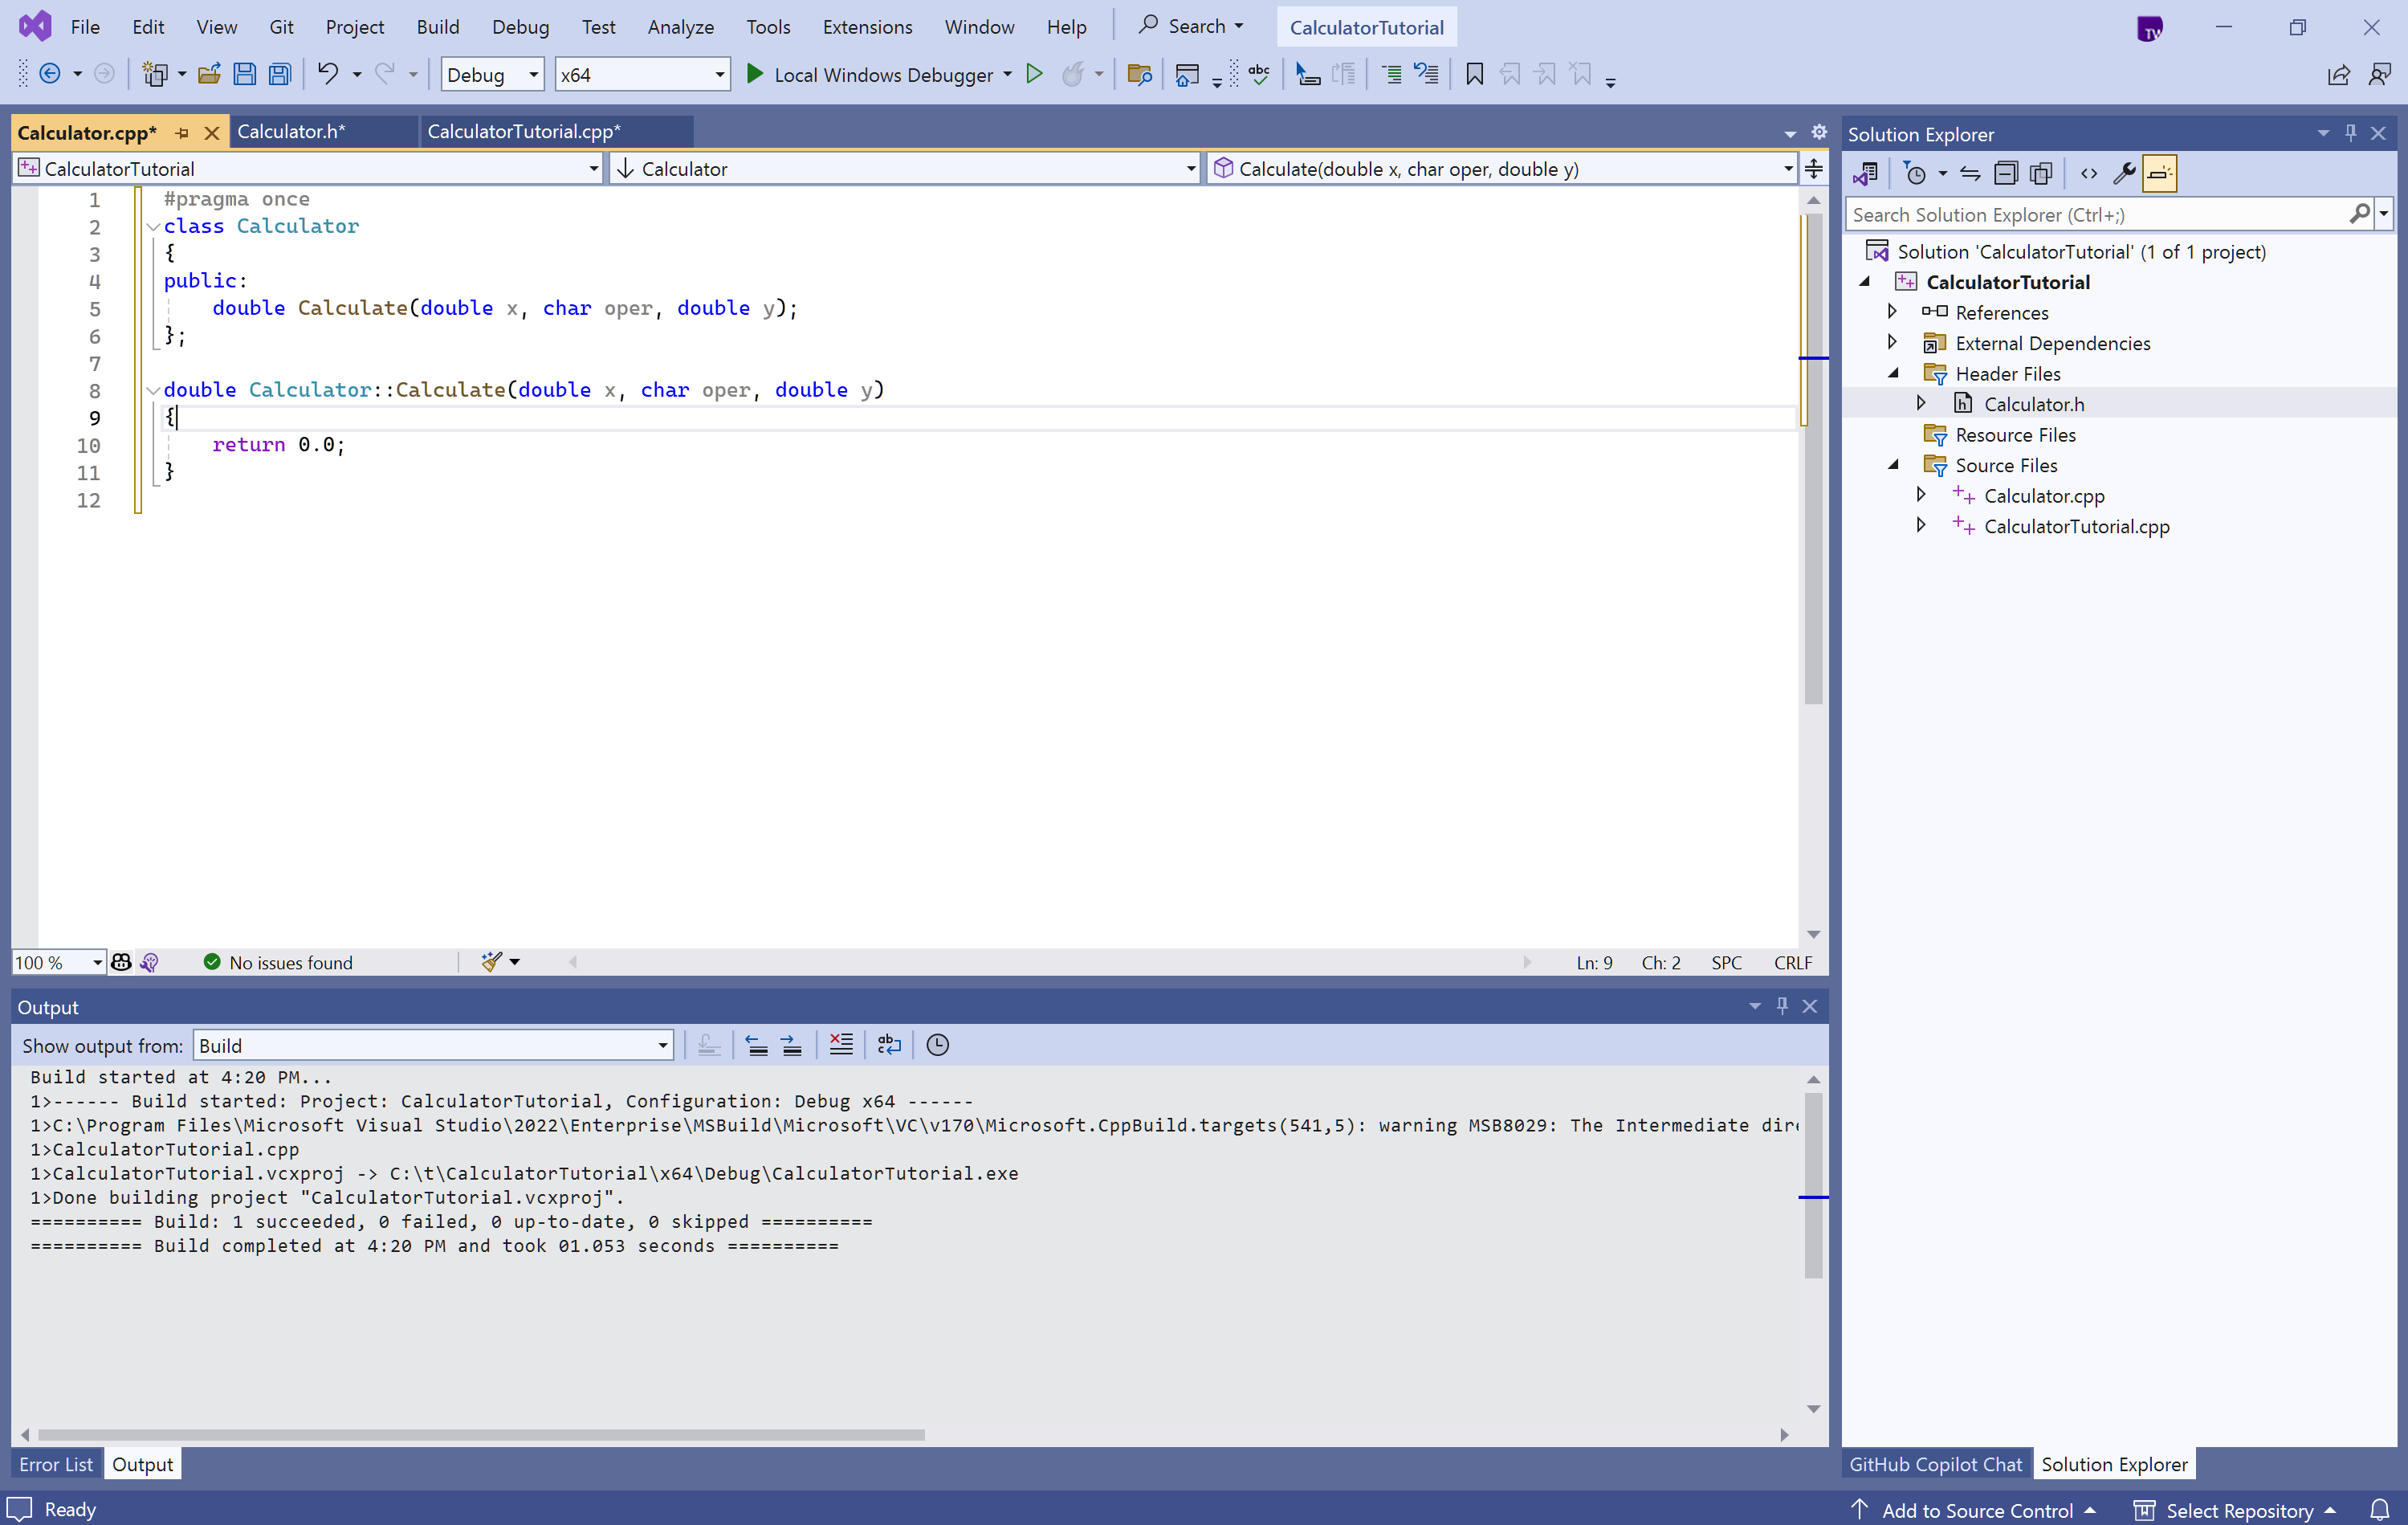 Screenshot of the Visual Studio editor showing the definition of the 'Calculate' ctor function.